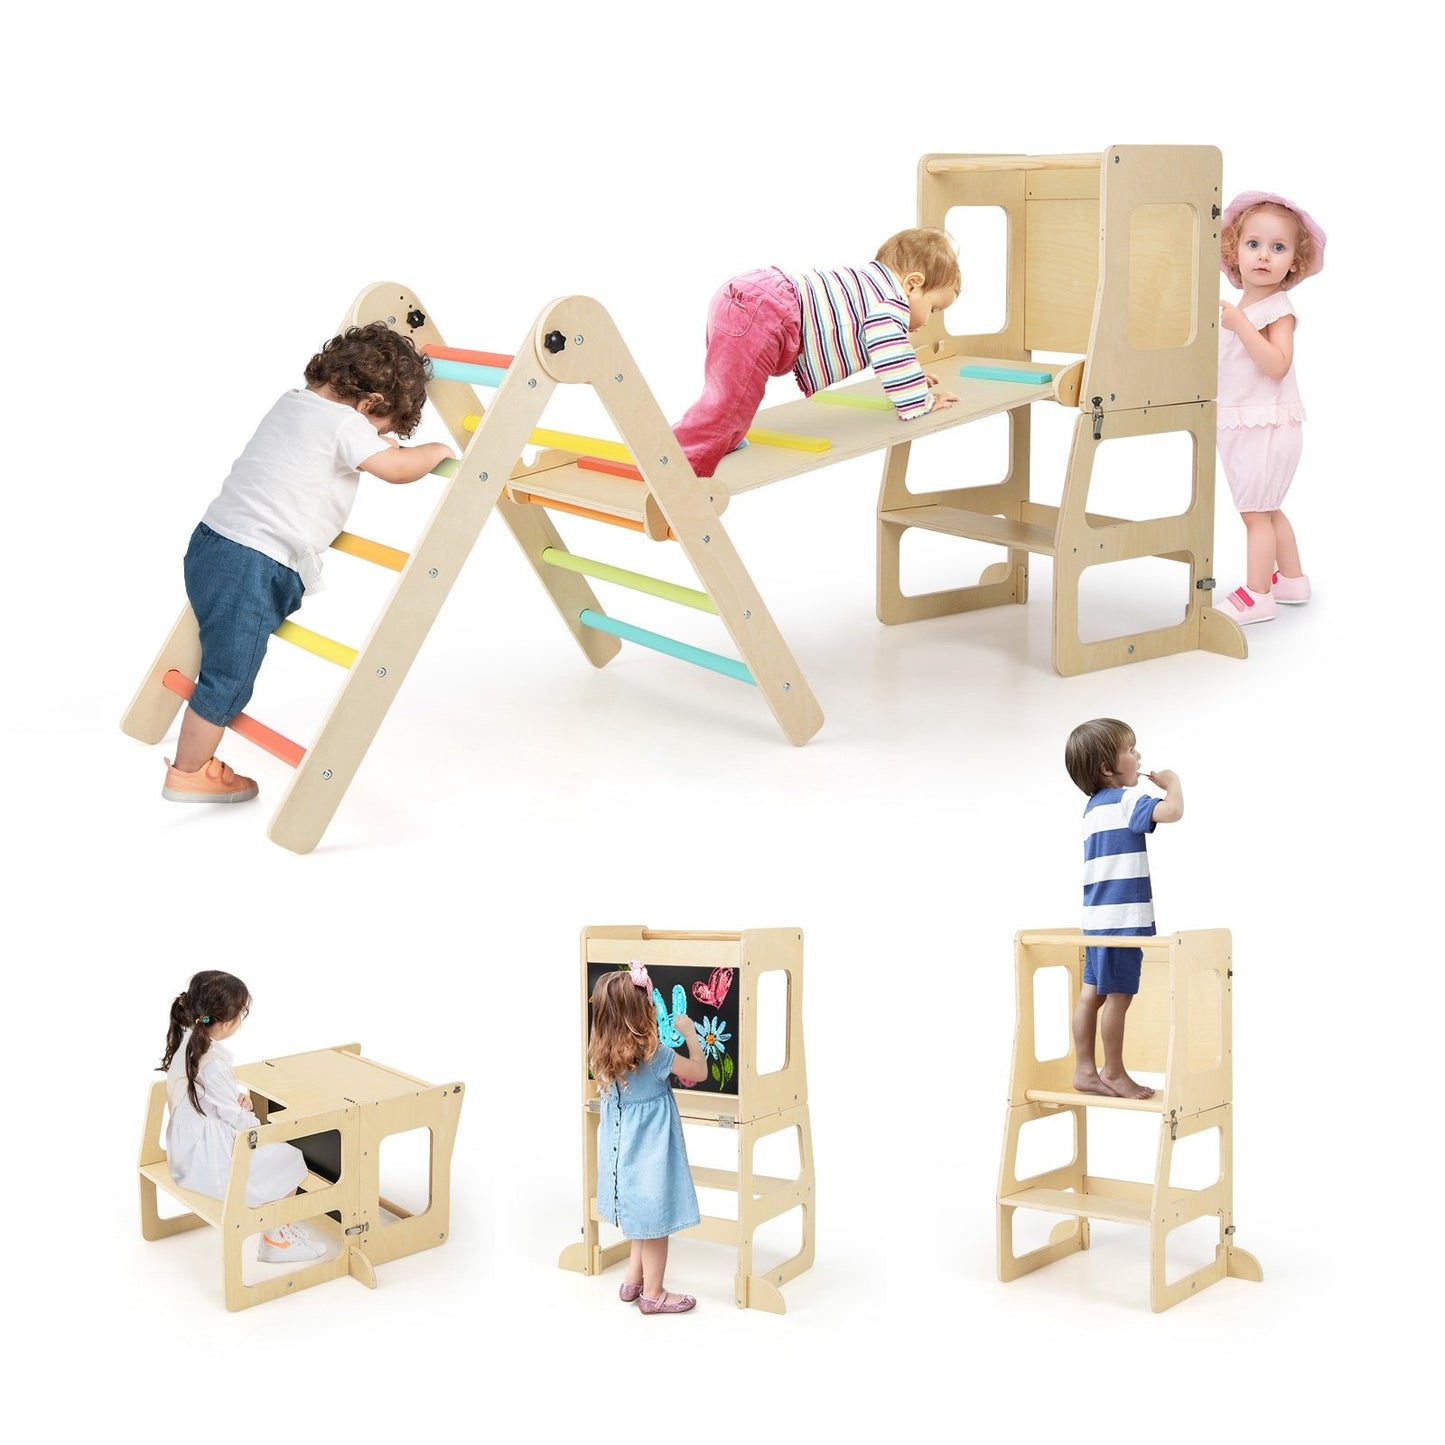 7-in-1 Toddler Climbing Toy Connected Table and Chair Set for Boys and Girls Aged 3-14 Years Old, Multicolor